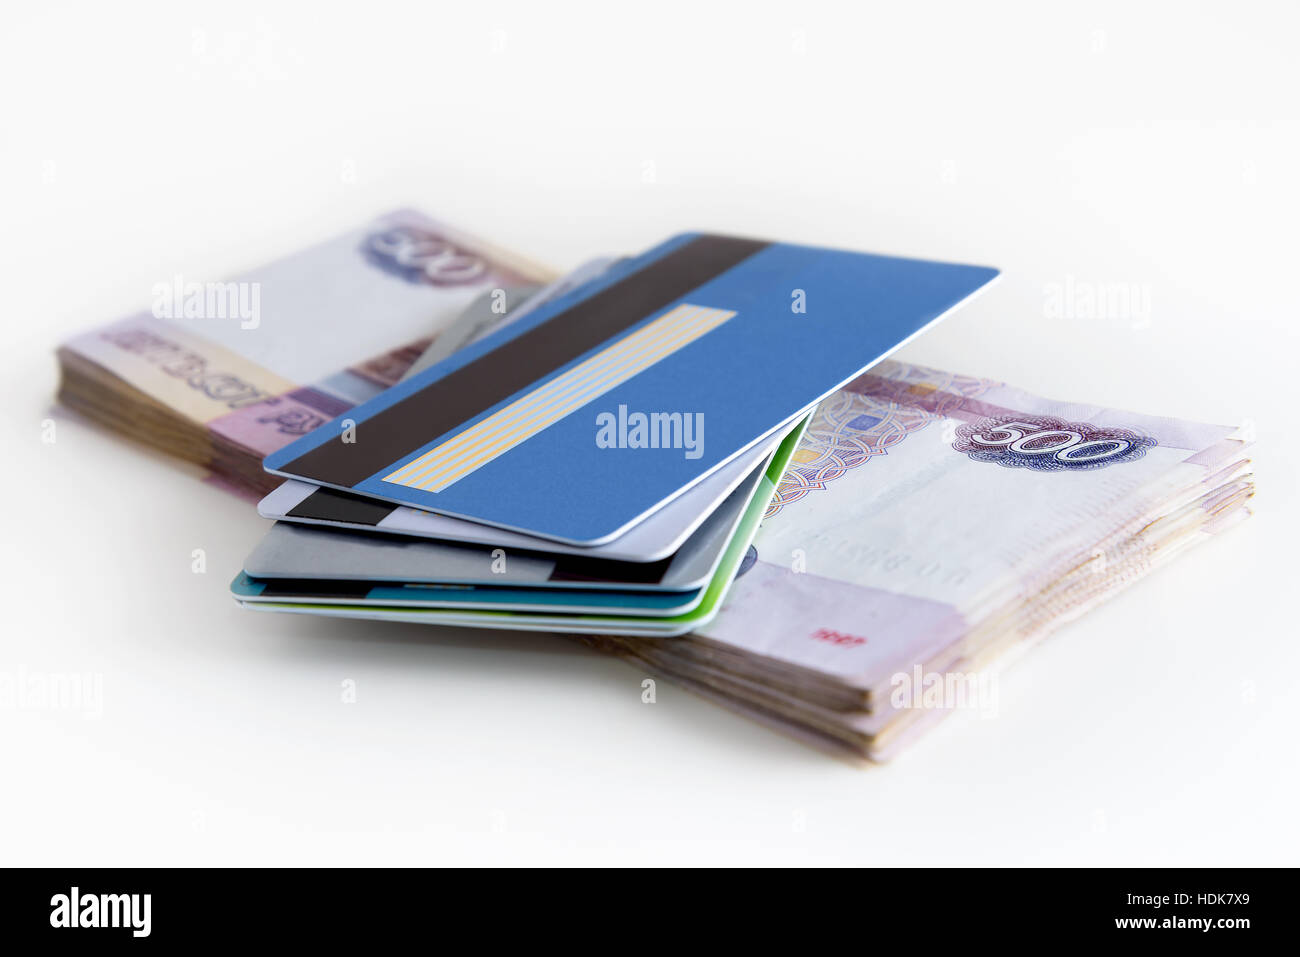 Bundle of bank card and a bundle of money in denominations of 500 rubles Stock Photo